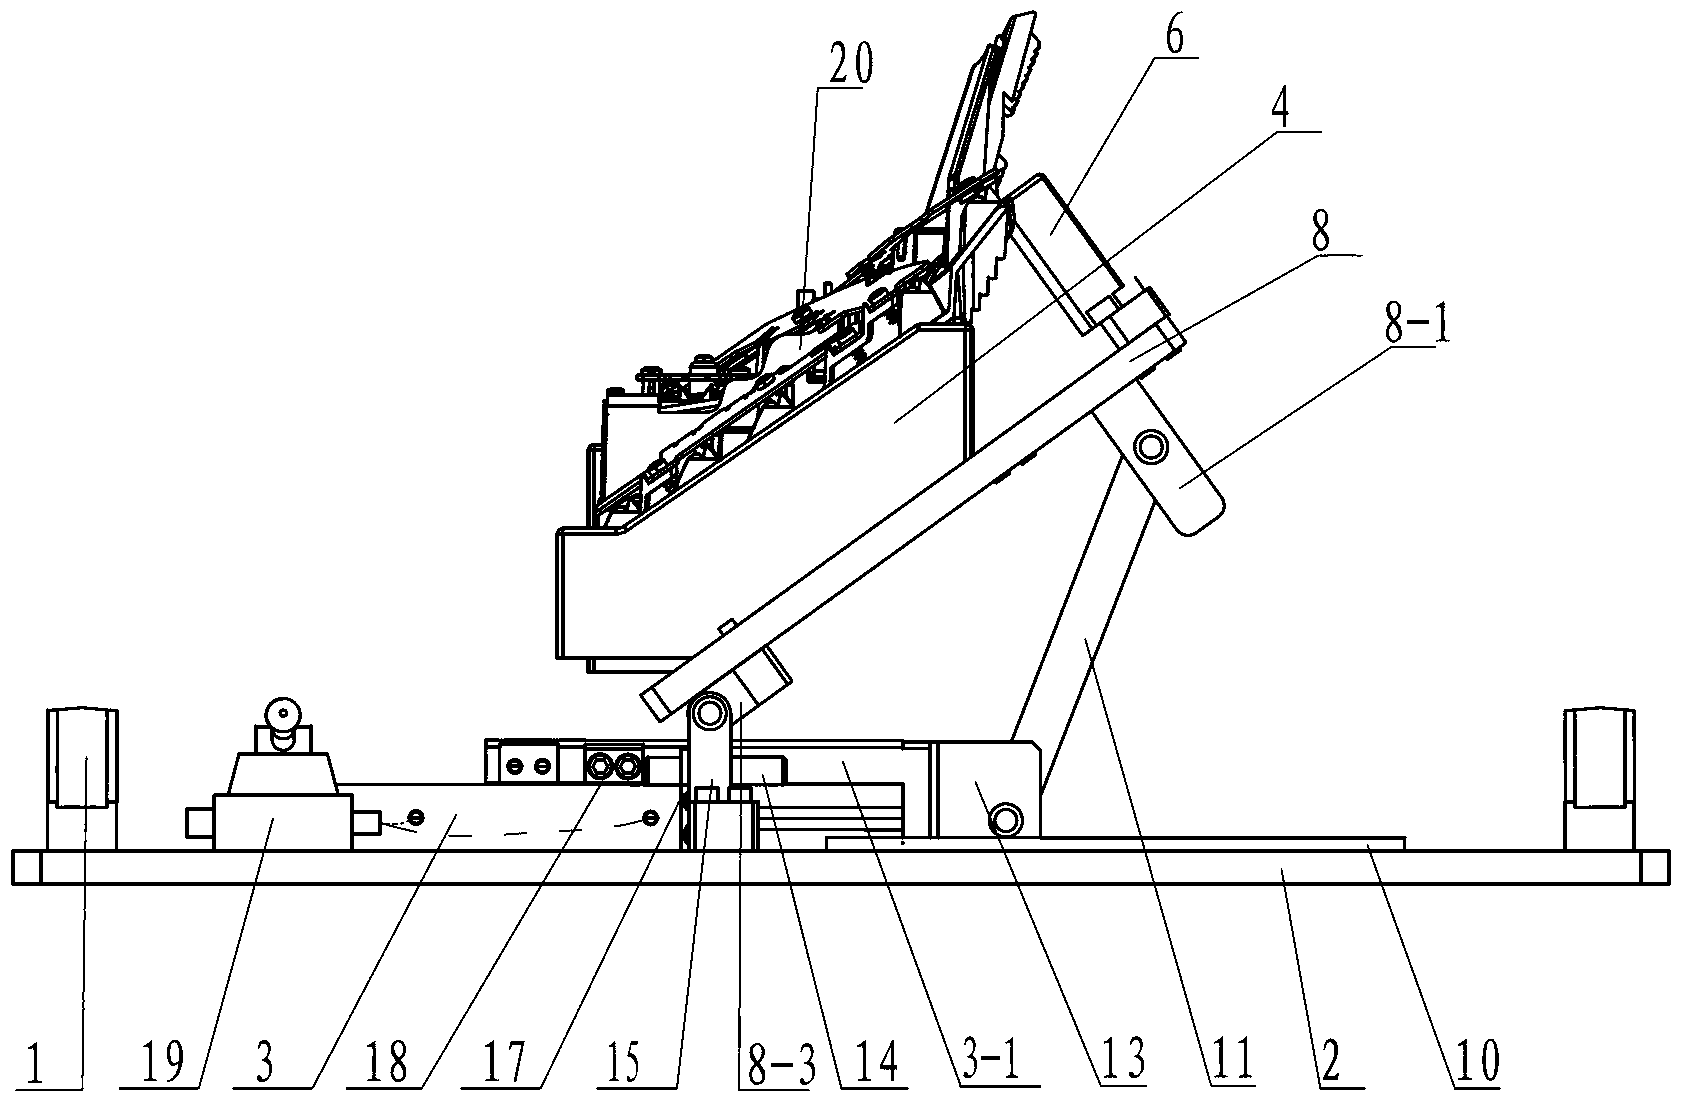 Work platform capable of turning at multiple angles